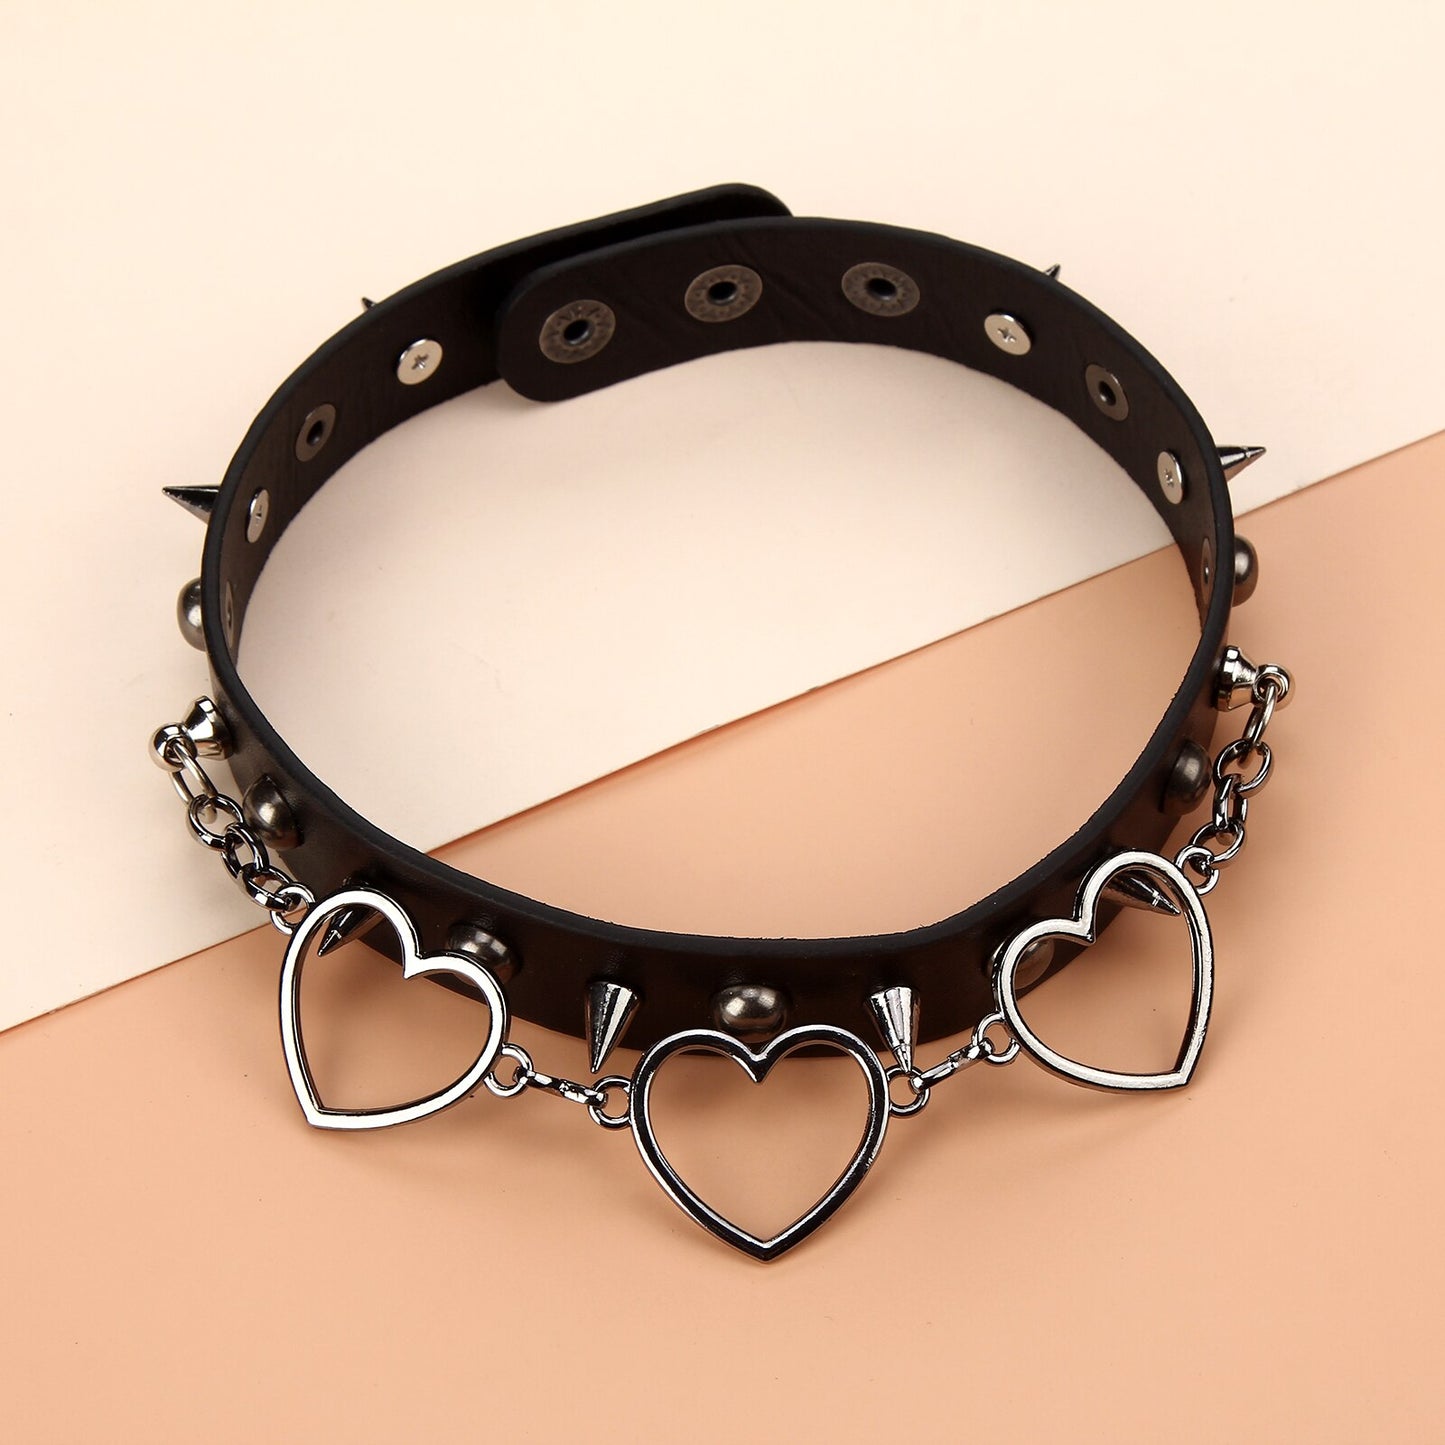 Punk Heart Pendant Leather Choker Collar for Women Girl Studded Punk Silver Color Chain Harajuku Collars Sexy Jewelry